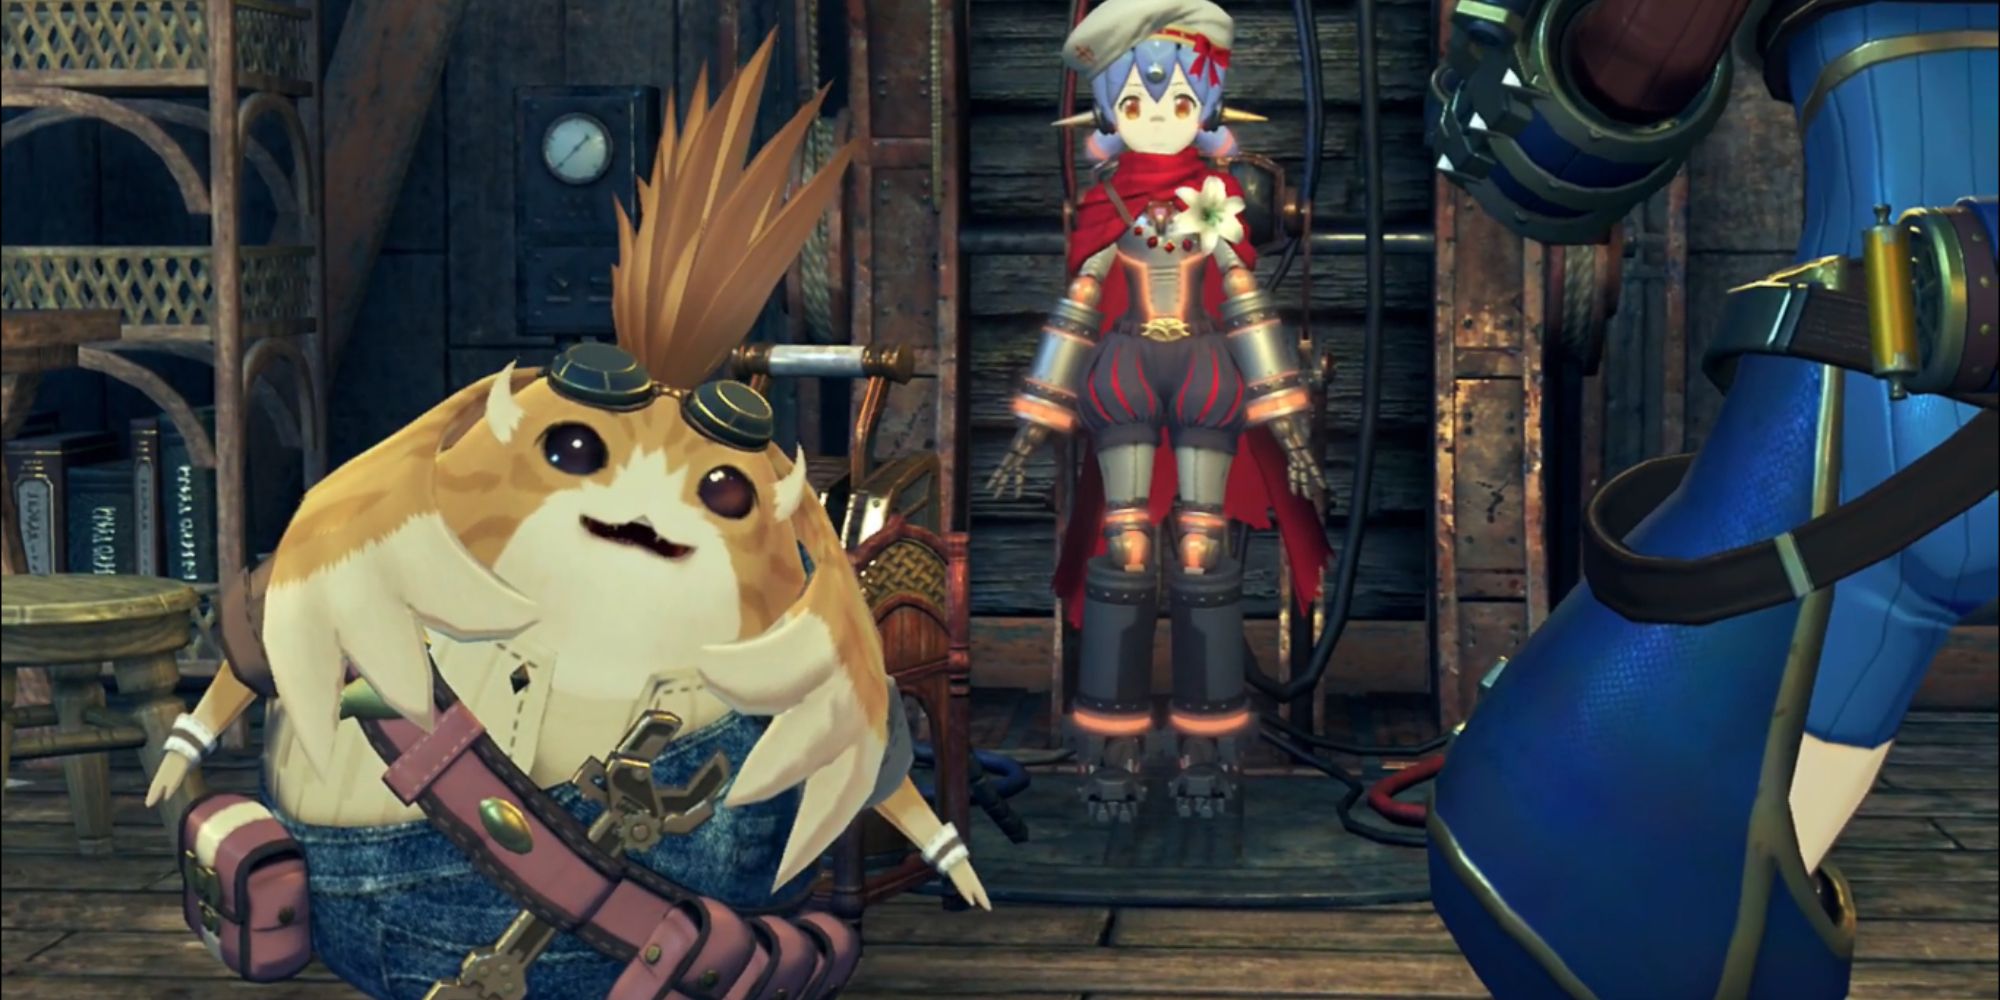 Xenoblade Chronicles 2 Characters Tora looking happily at Rex who is mostly off screen with Poppi appearing in the centre against a metallic background